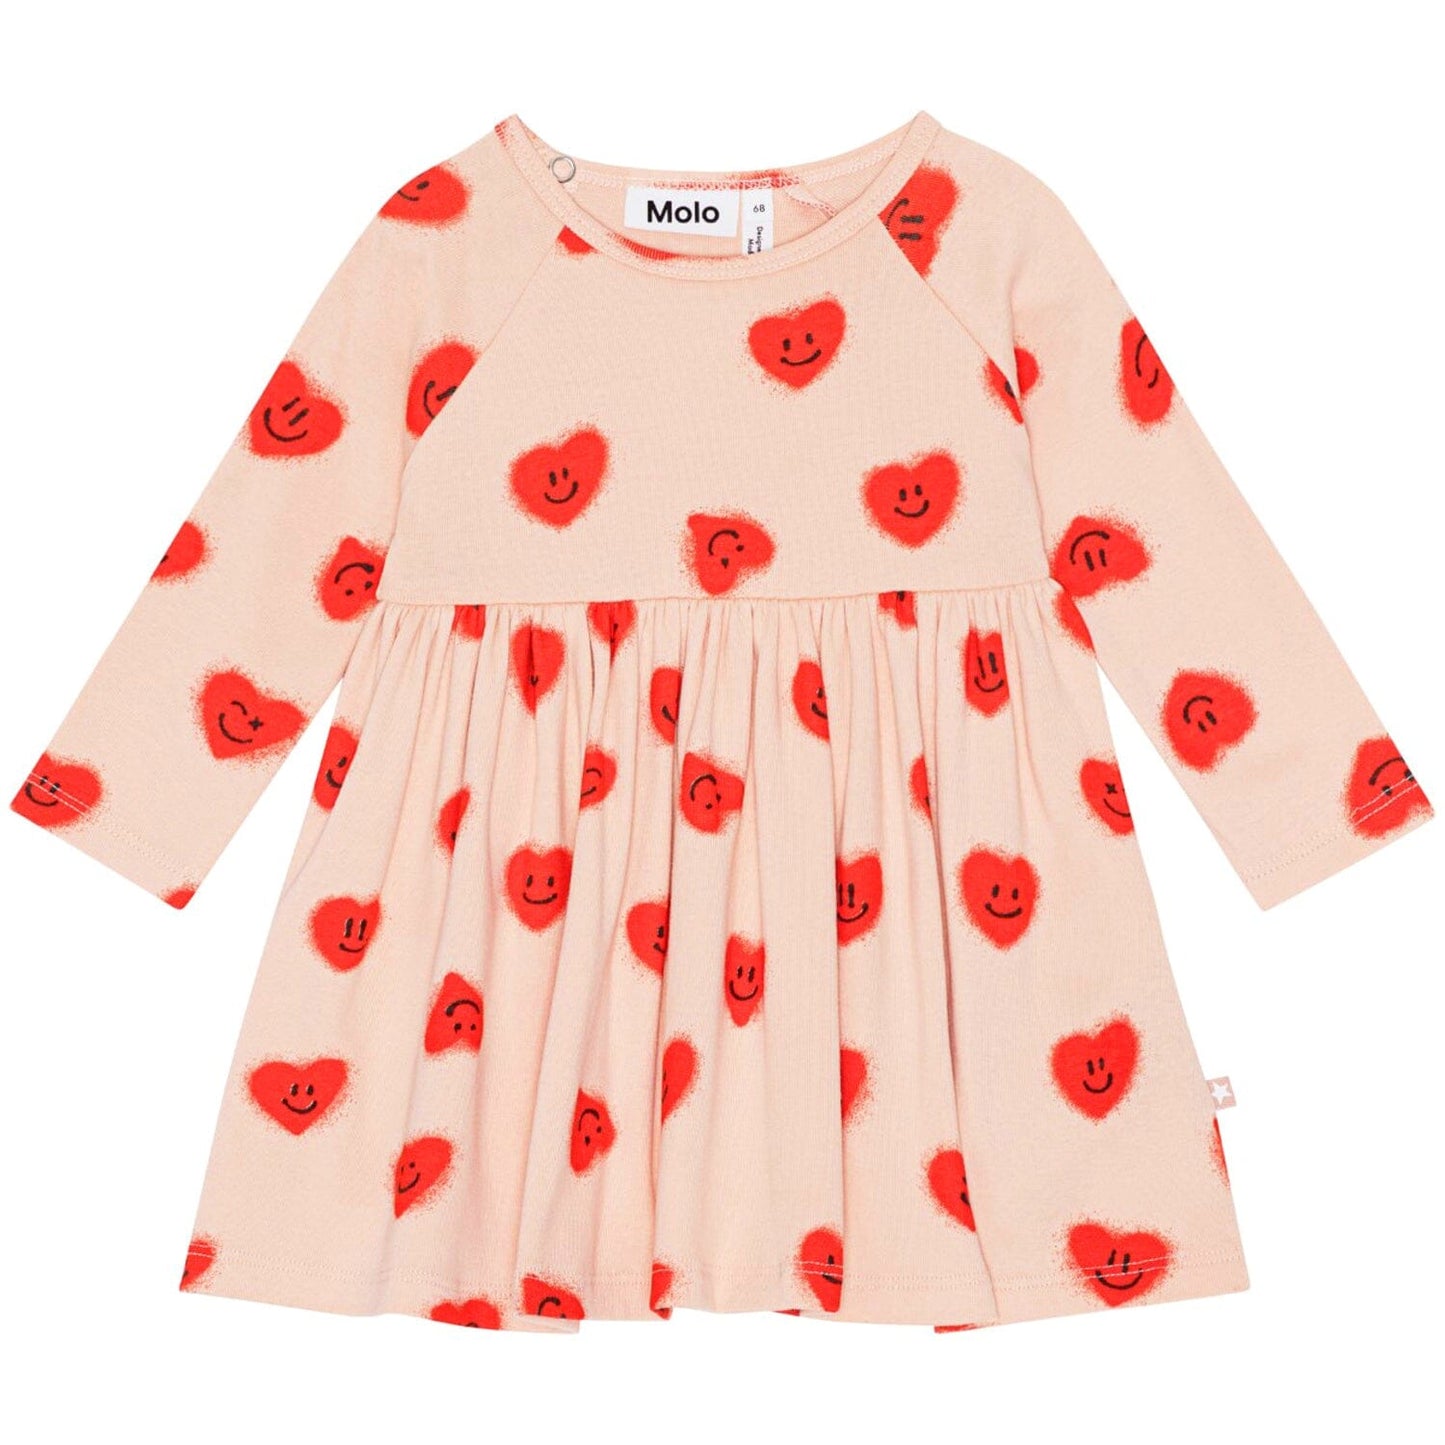 Red Hearts Jersey Dress 120 BABY GIRLS APPAREL Molo 6m 